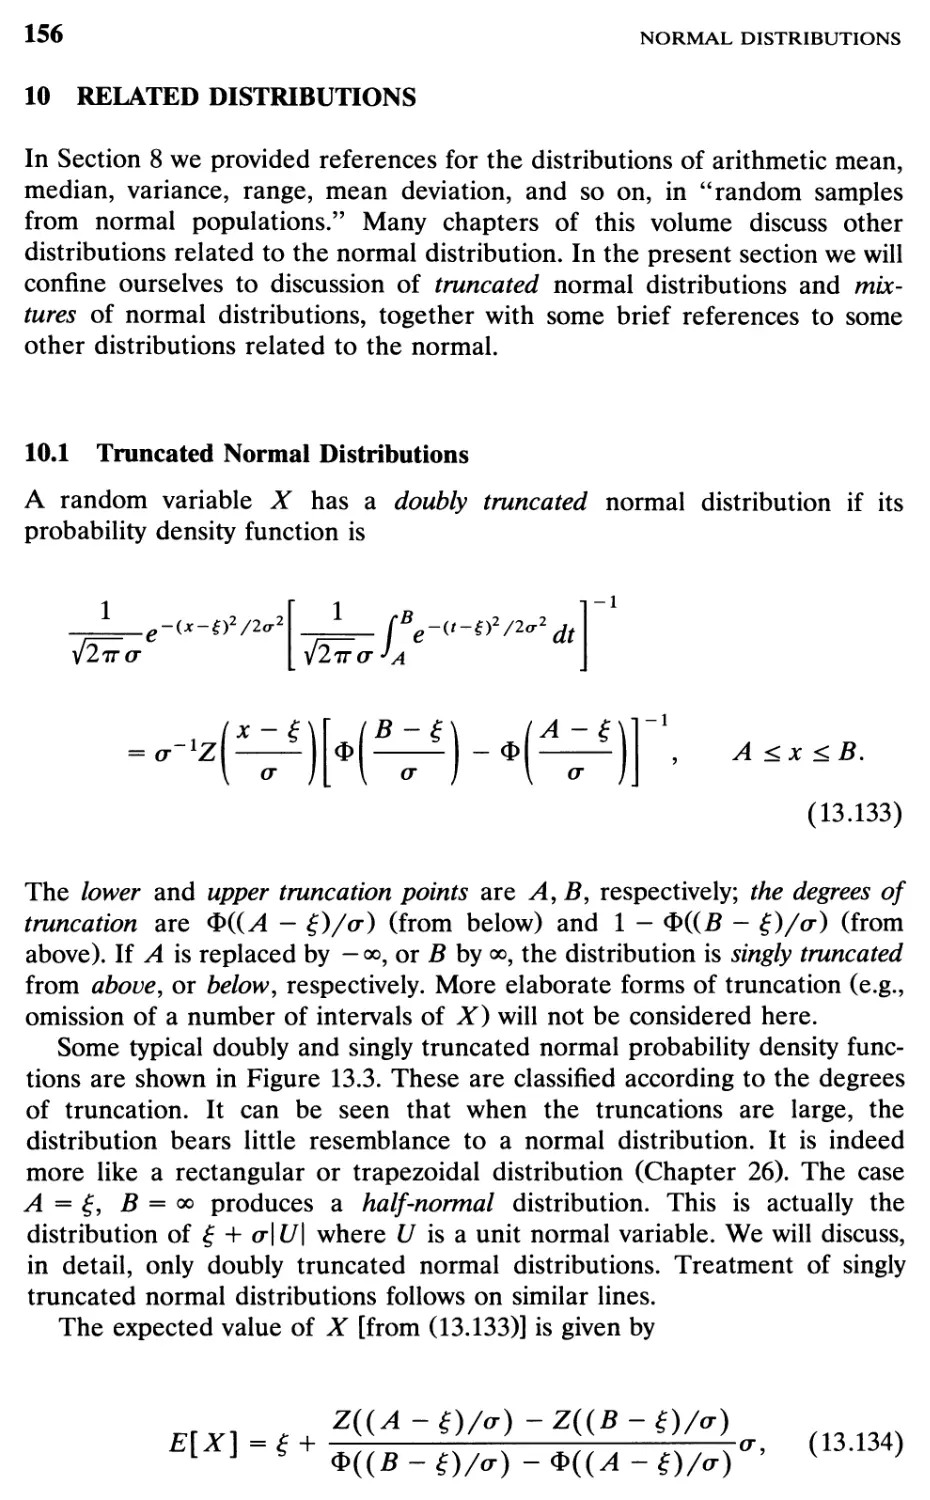 10 Related Distributions, 156